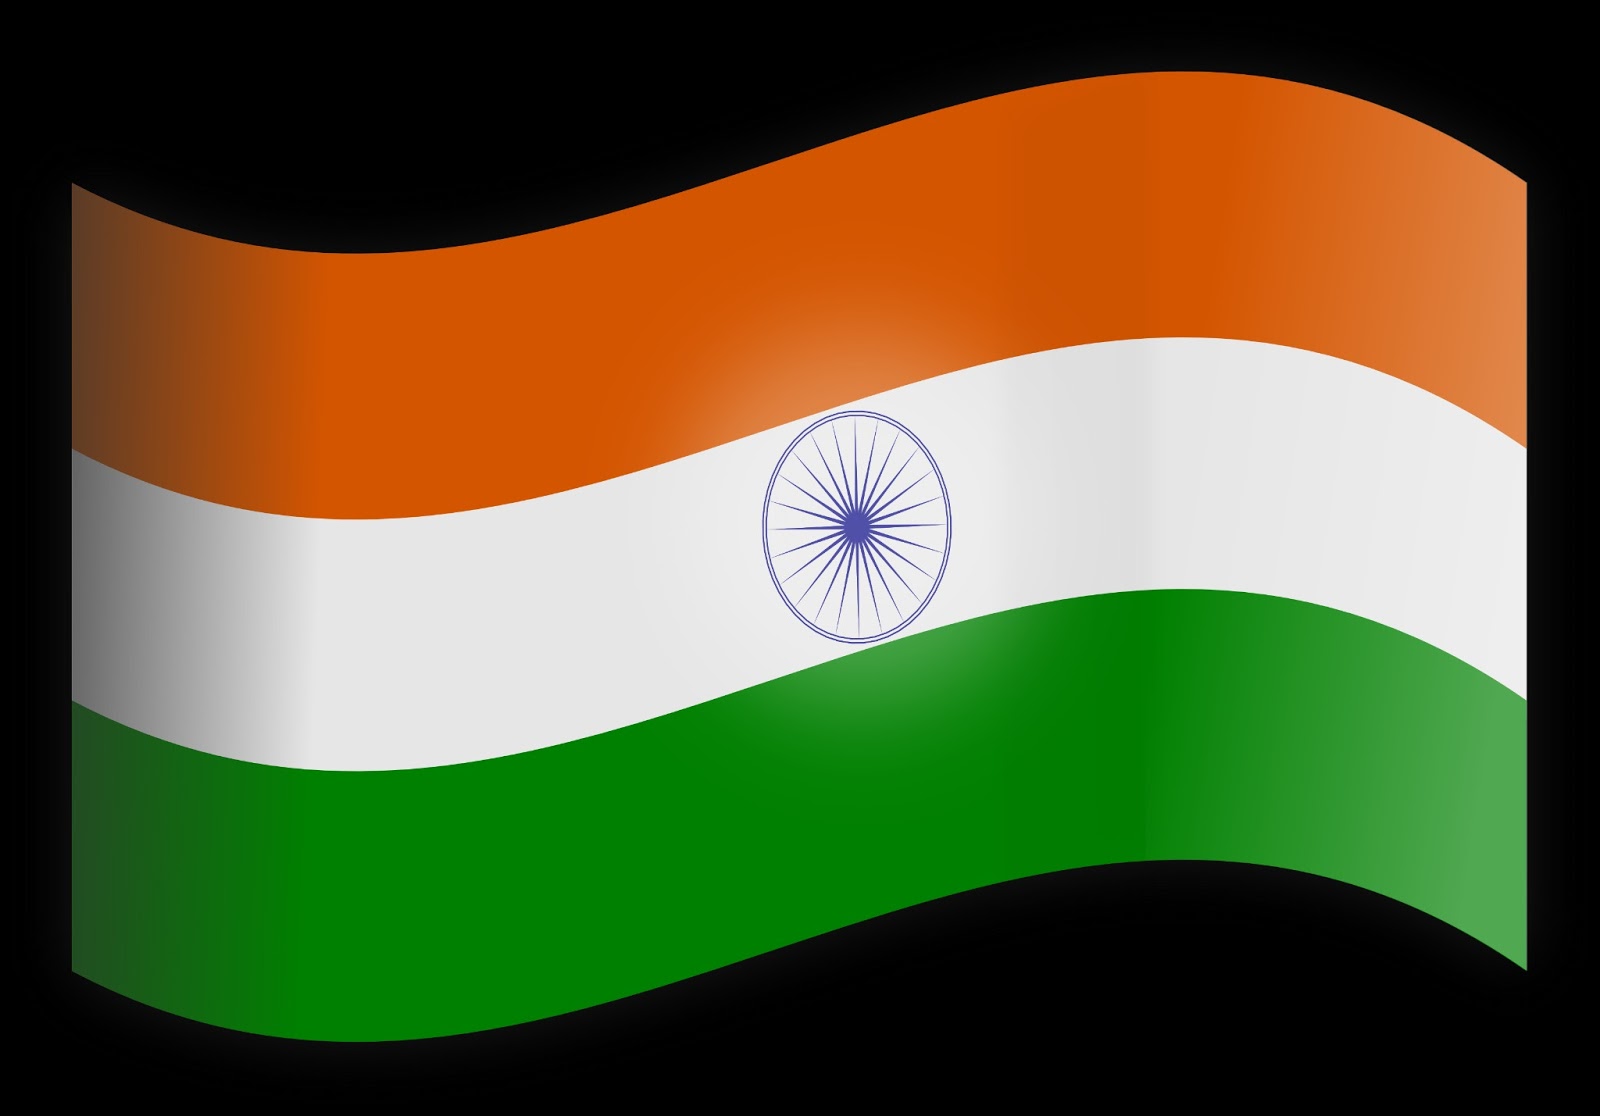 Different Amazing Animated Simple Indian Flag Map HD Image